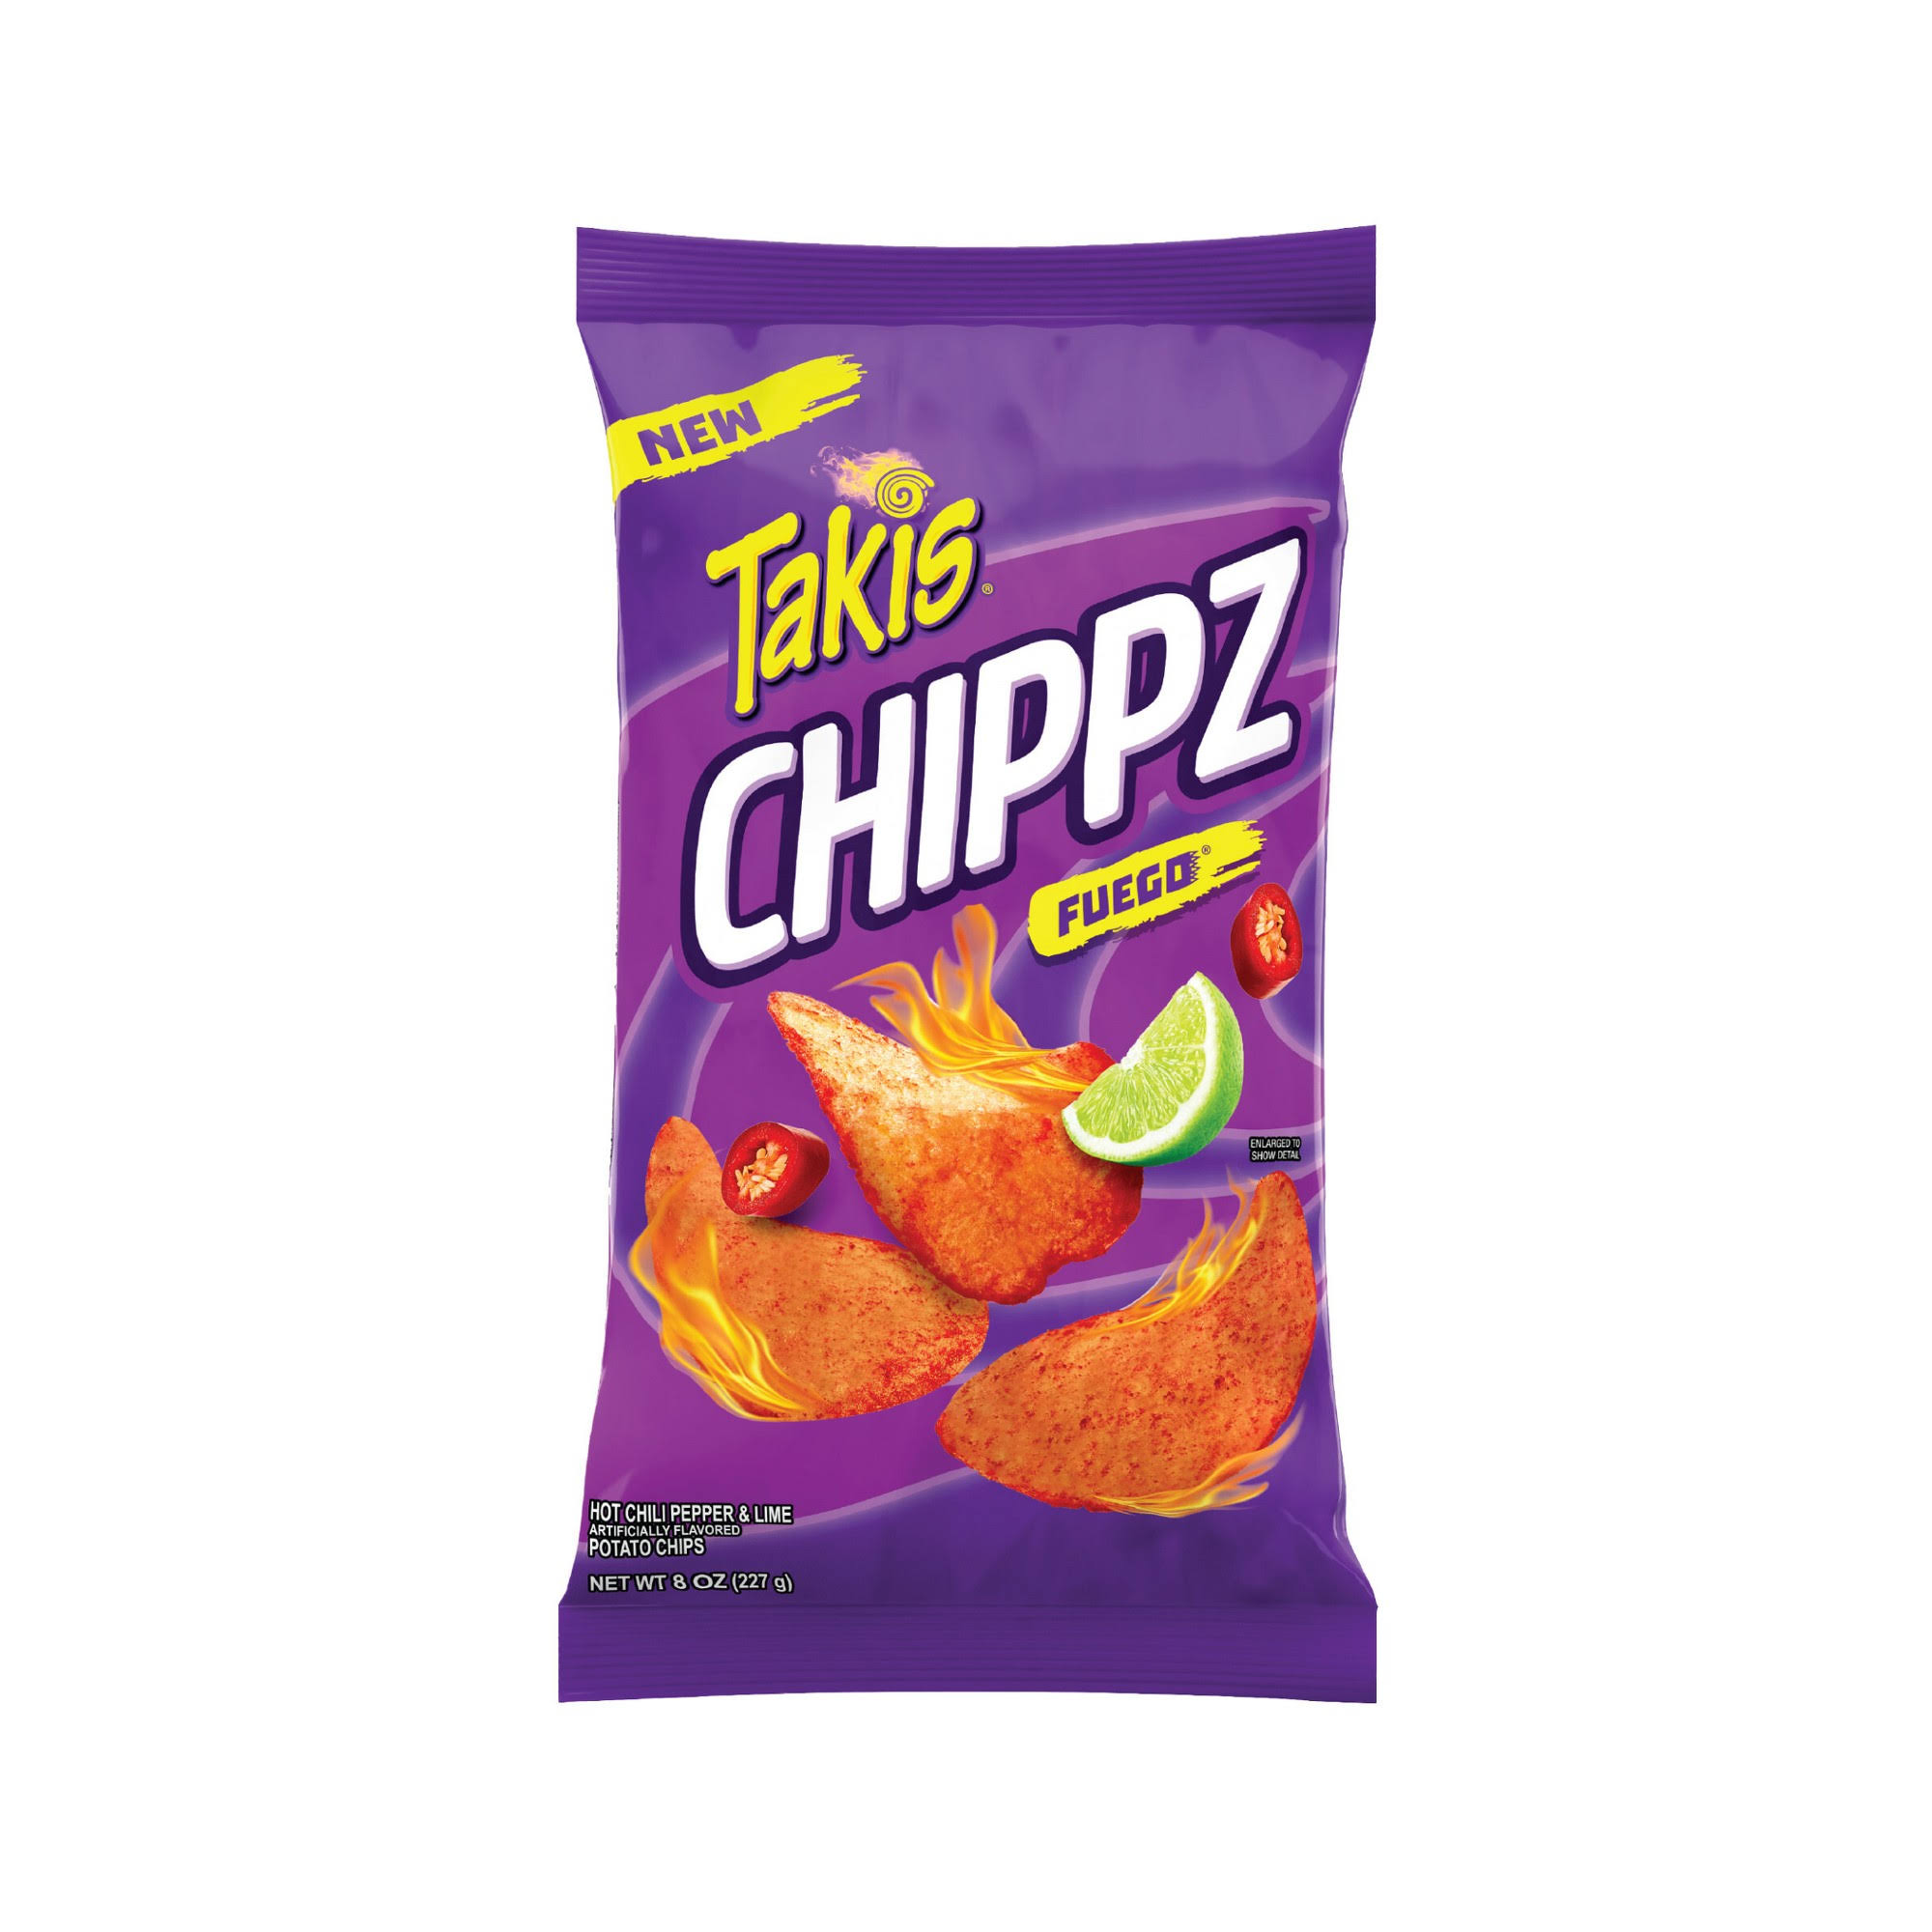 Takis Chippz Fuego - 8oz, Chips and Snacks